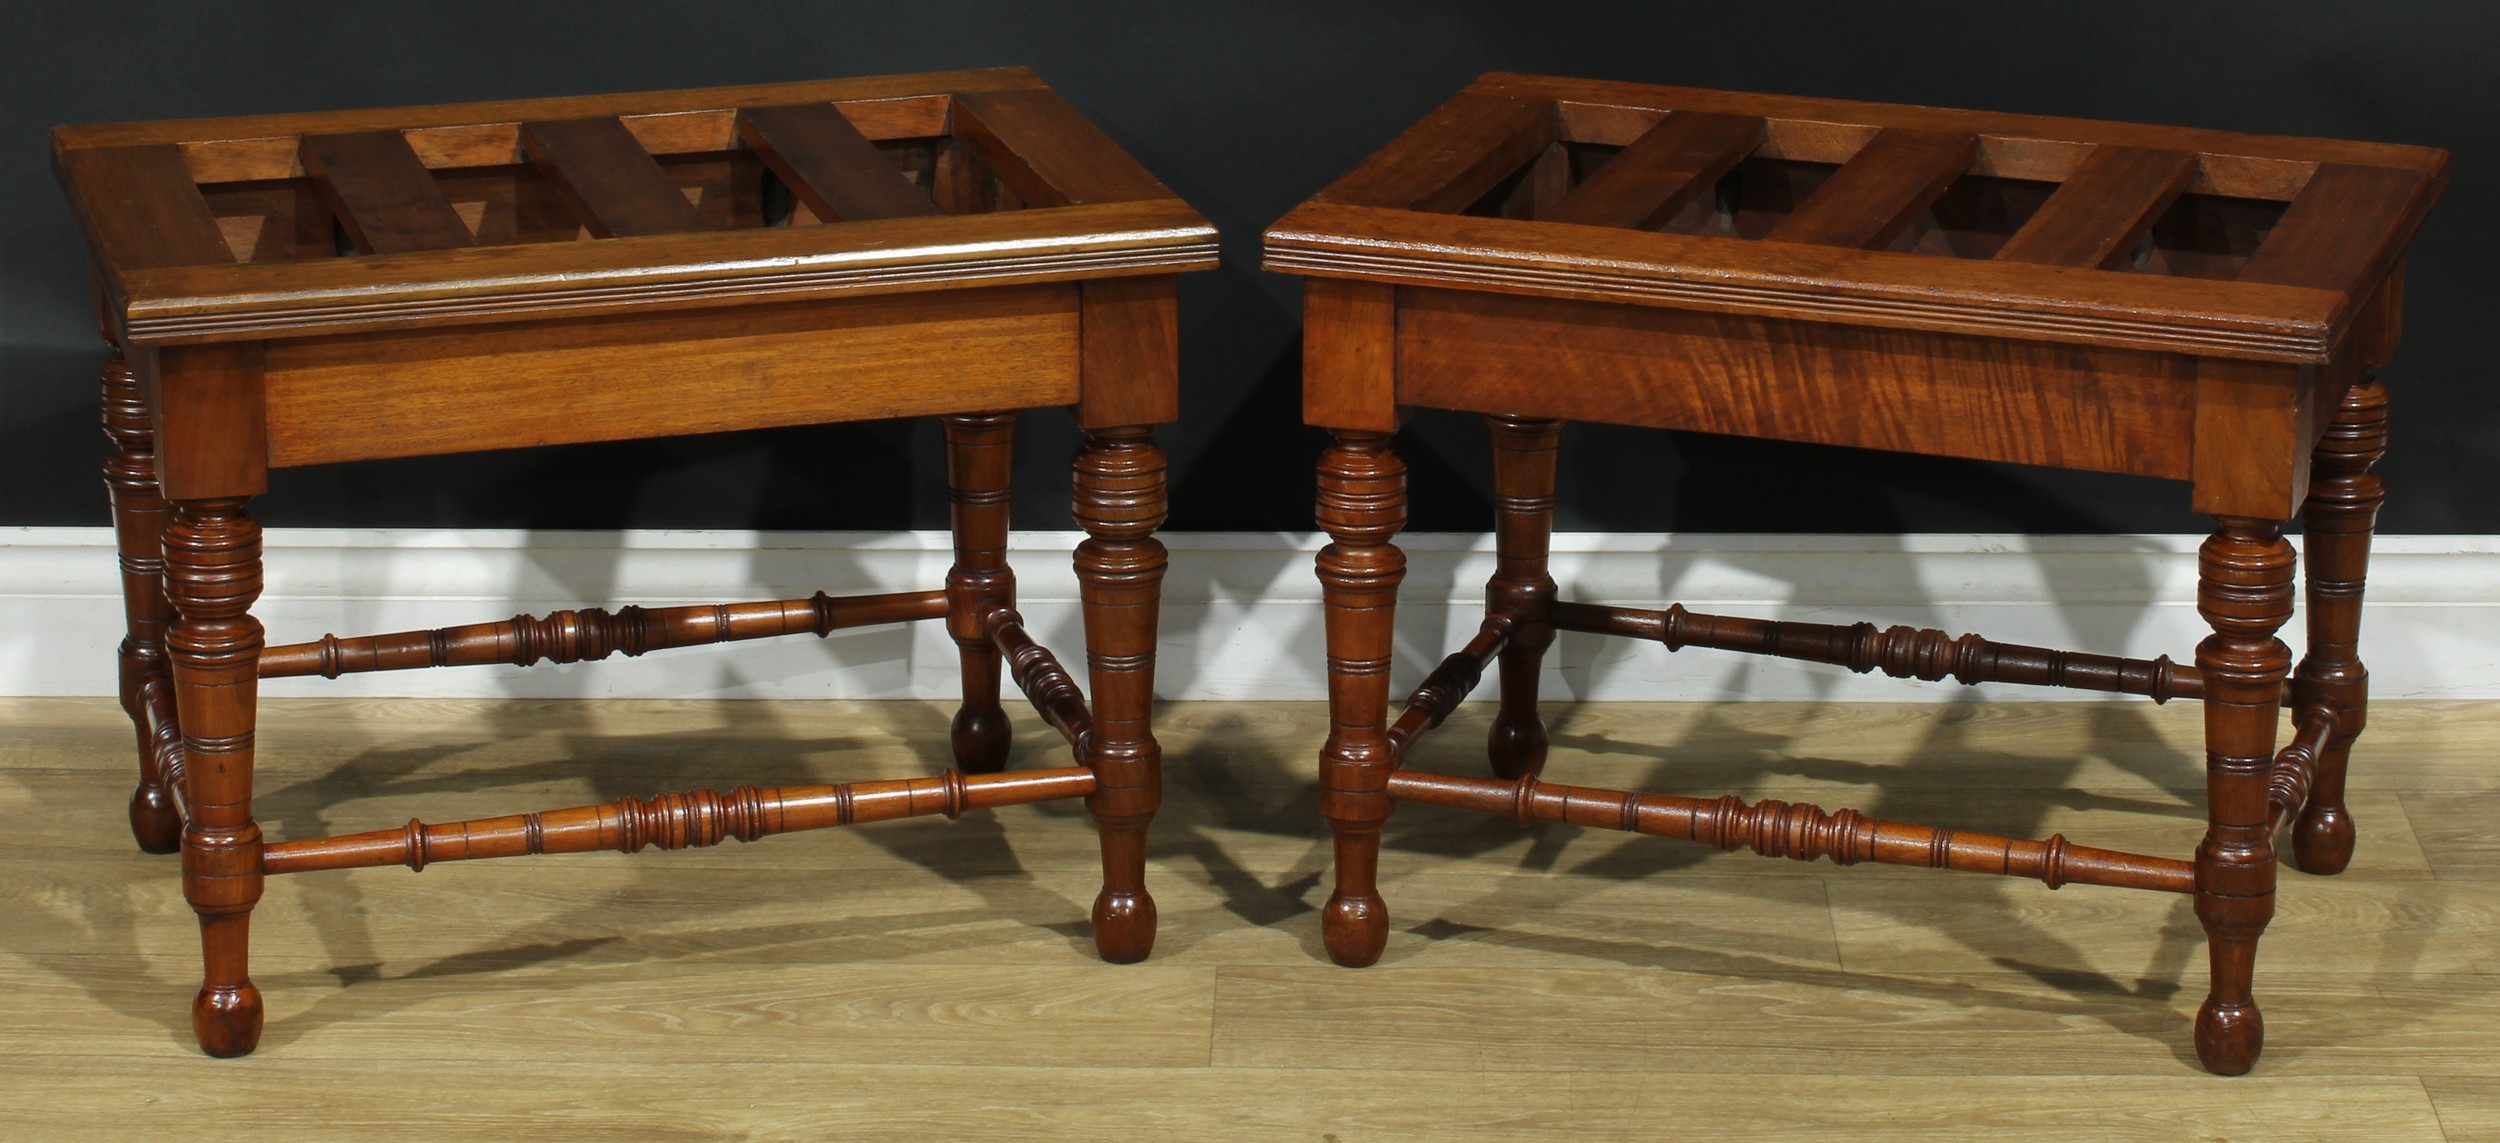 A pair of late Victorian walnut and mahogany rectangular luggage stands, each with oversailing